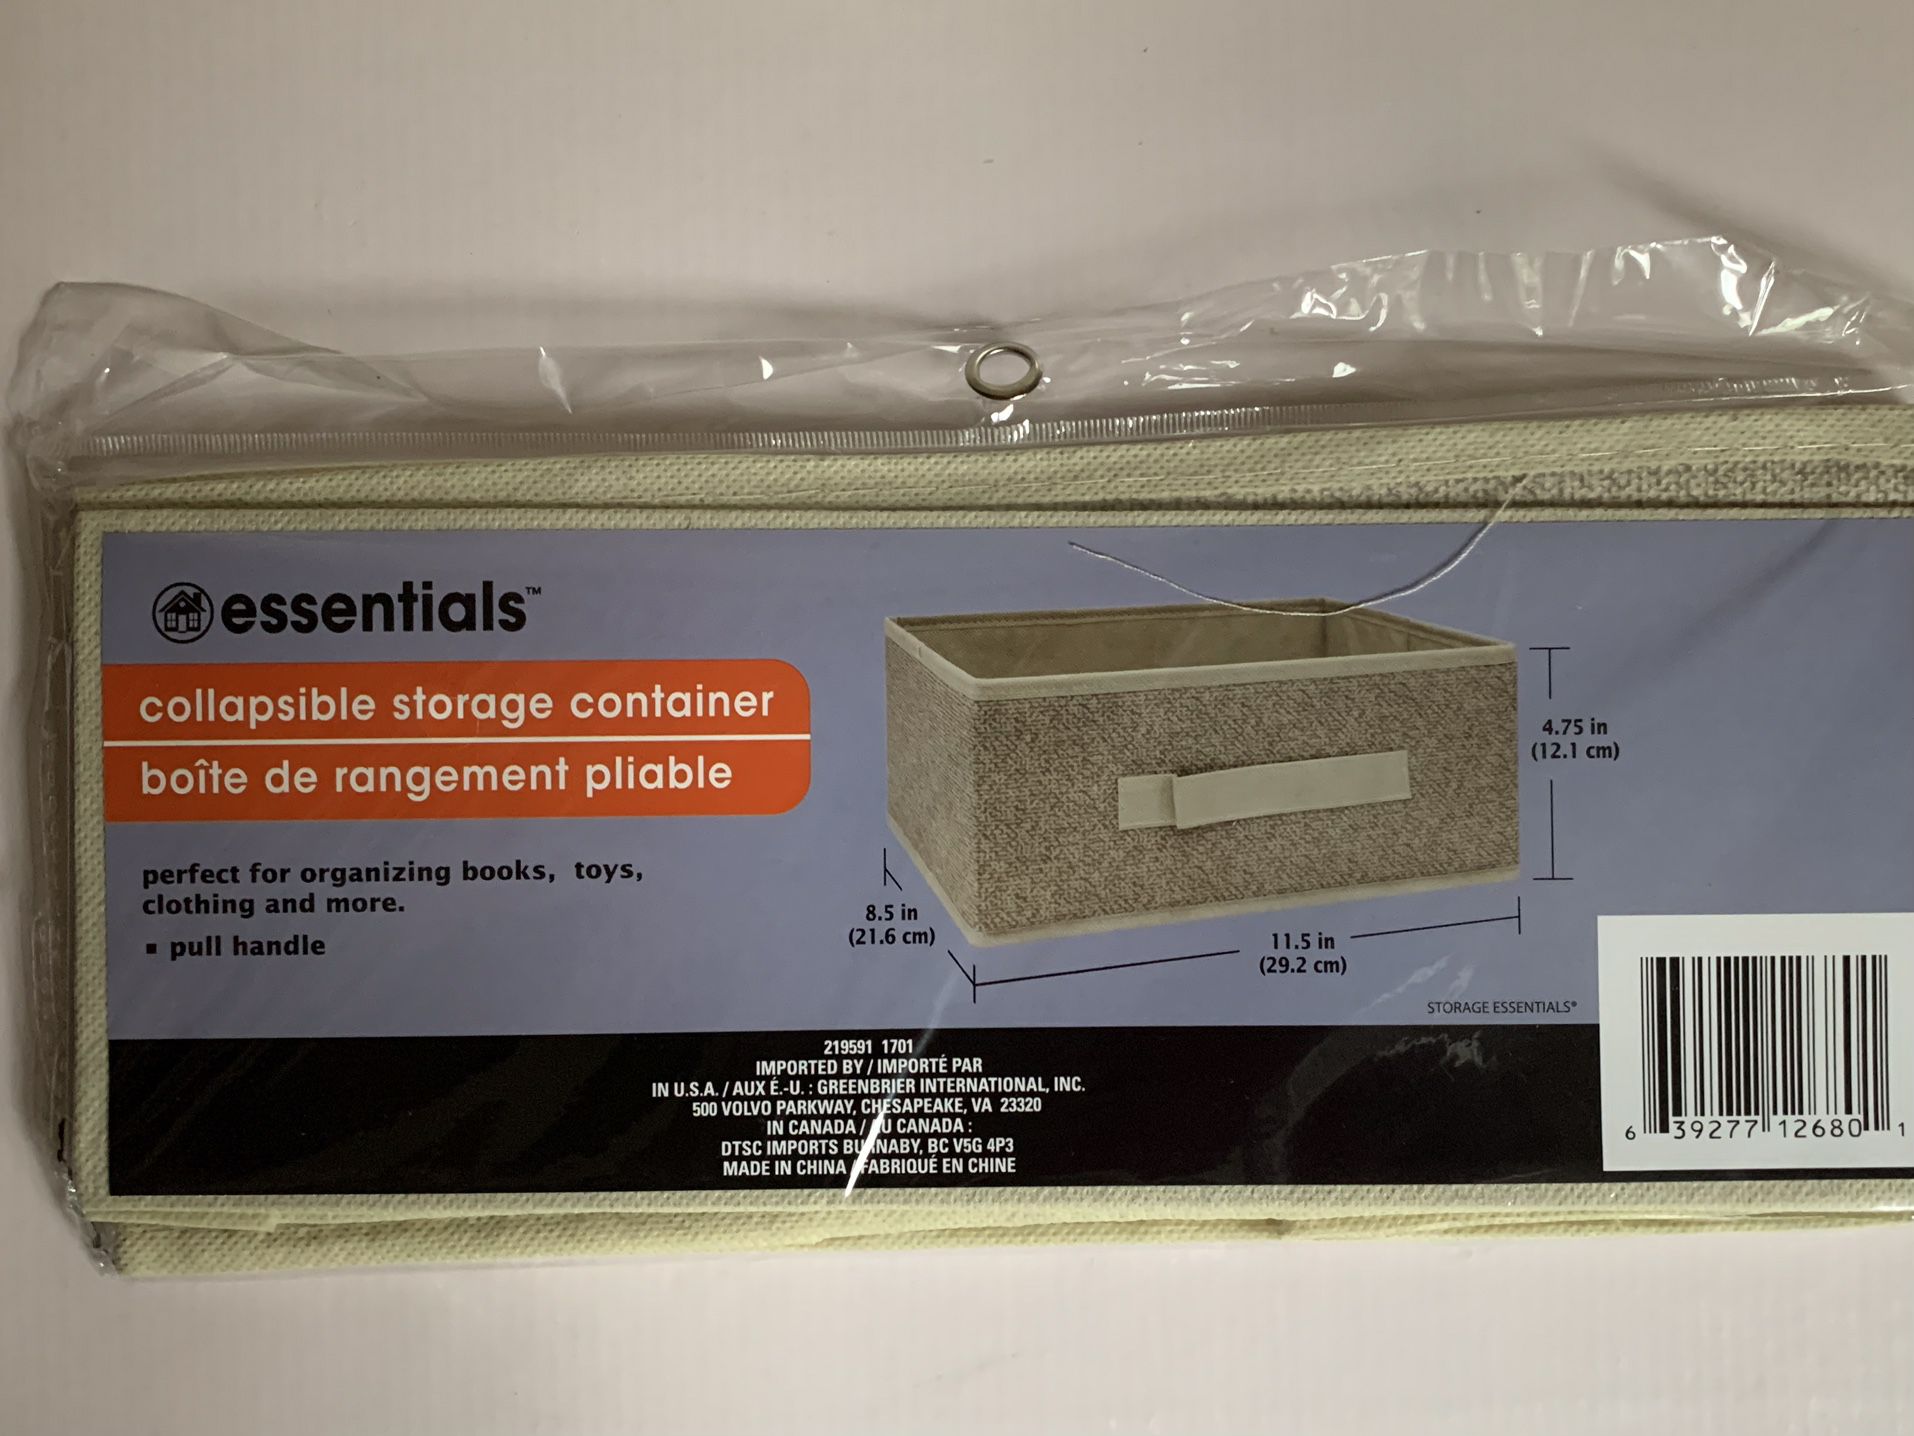 NIB Essentials Collapsible Storage Containers 8.5”x11.5”x4.75” - 12 Available 